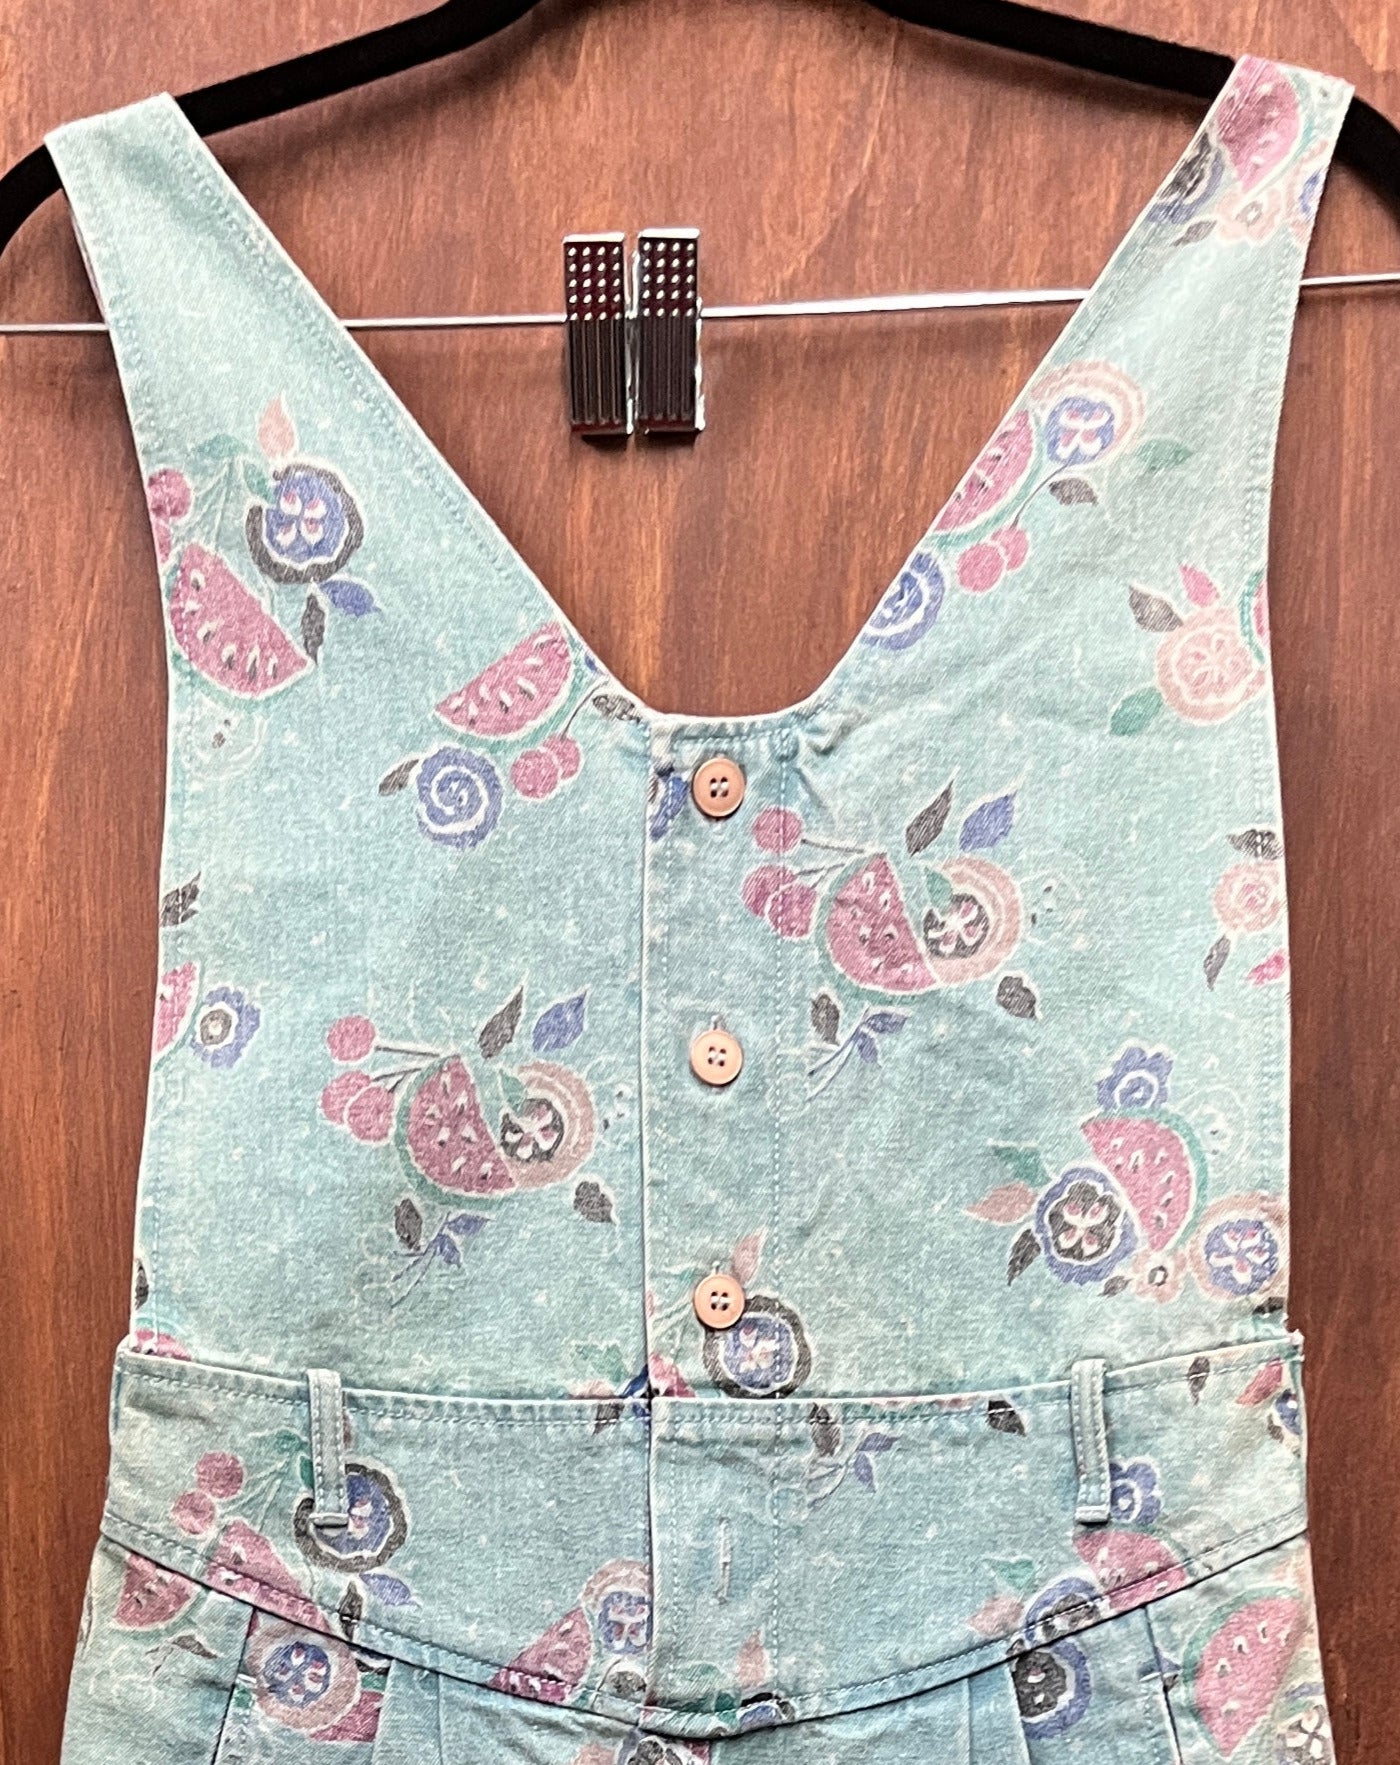 1990s PANTS-OVERALLS- blue green denim with fruit detail